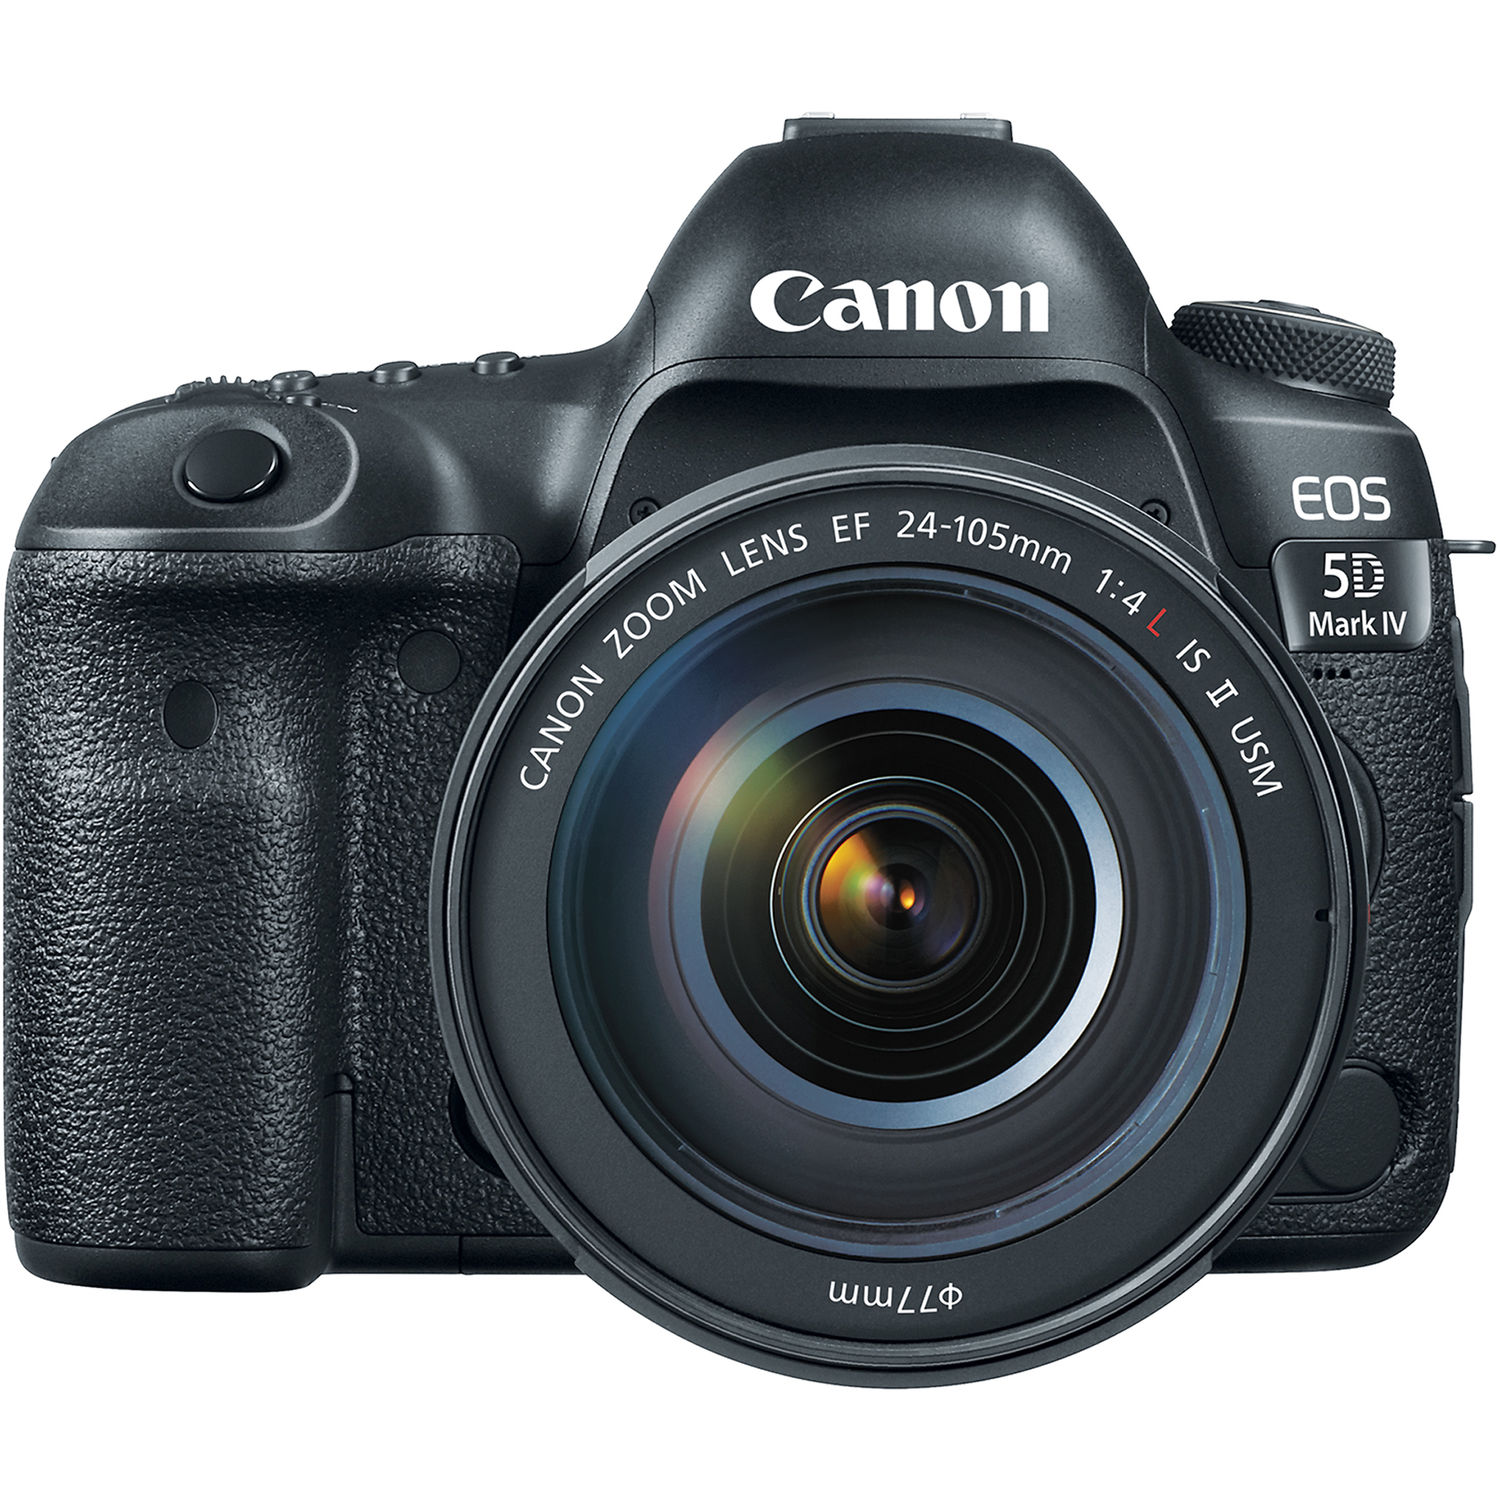 Canon EOS 5D Mark IV DSLR Camera with 24-105mm F/4L II Lens - image 2 of 4